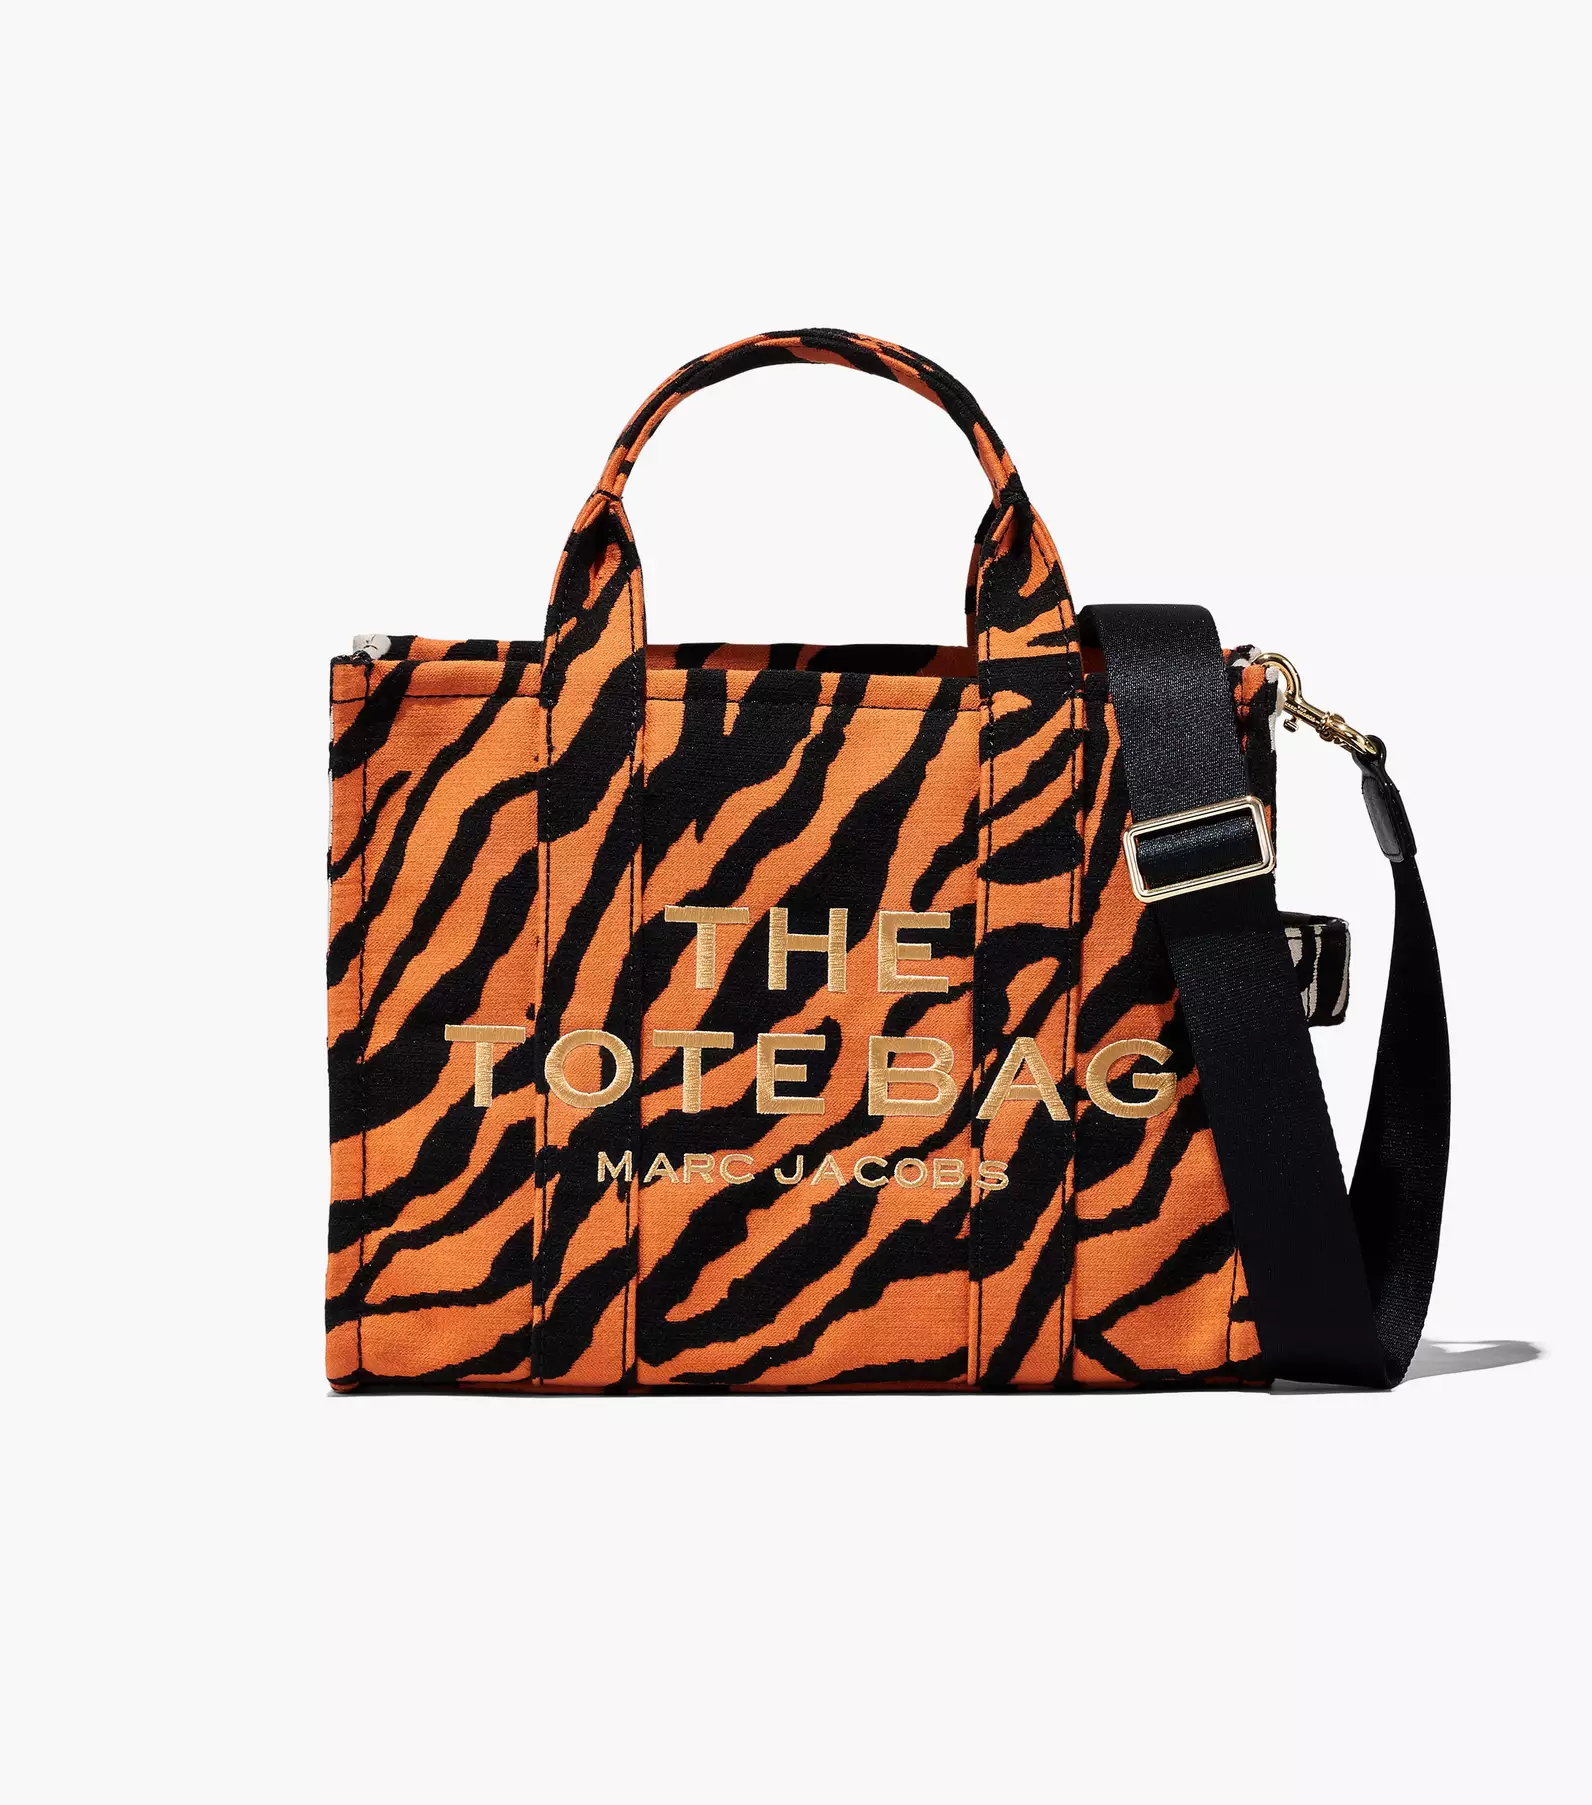 the tote bag marc jacobs